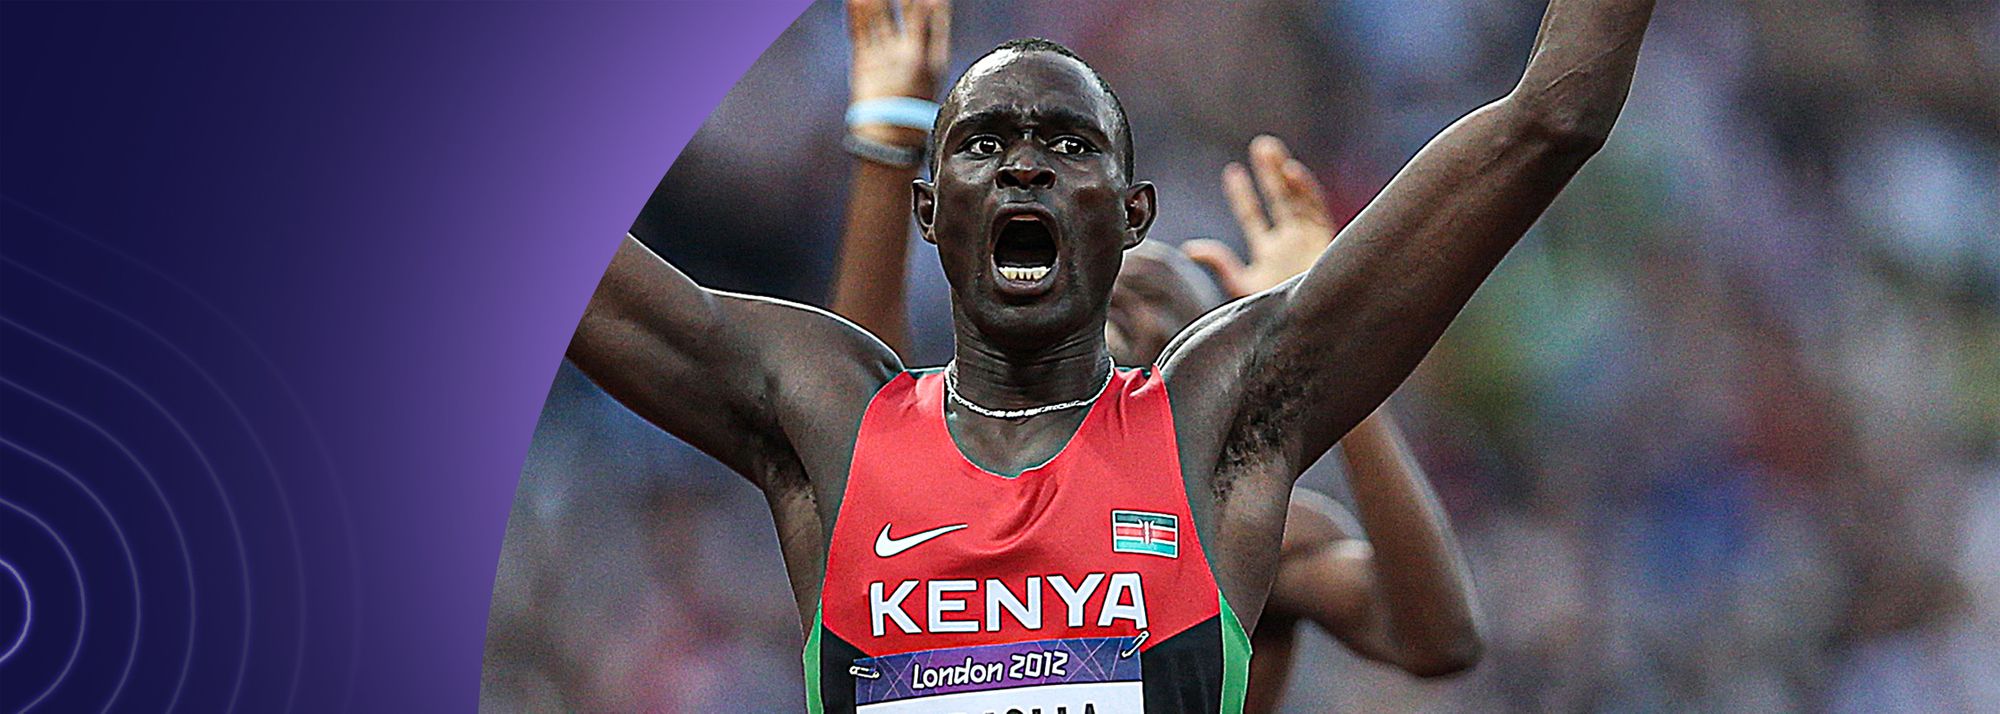 Middle distance legend David Rudisha opened up about his career on and off the track